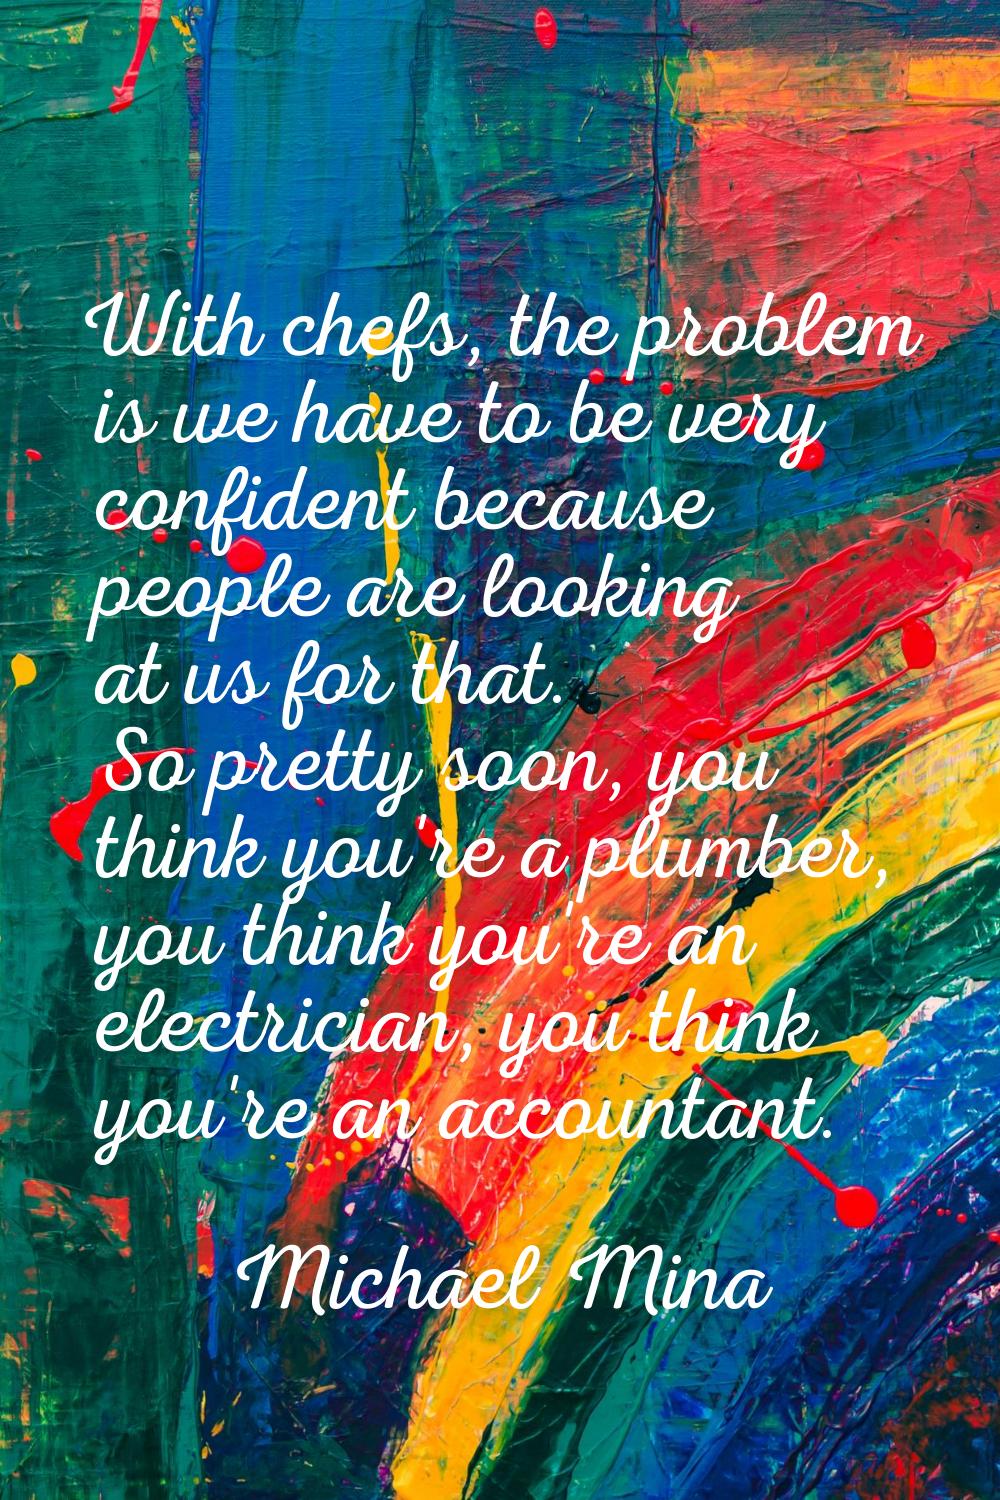 With chefs, the problem is we have to be very confident because people are looking at us for that. 